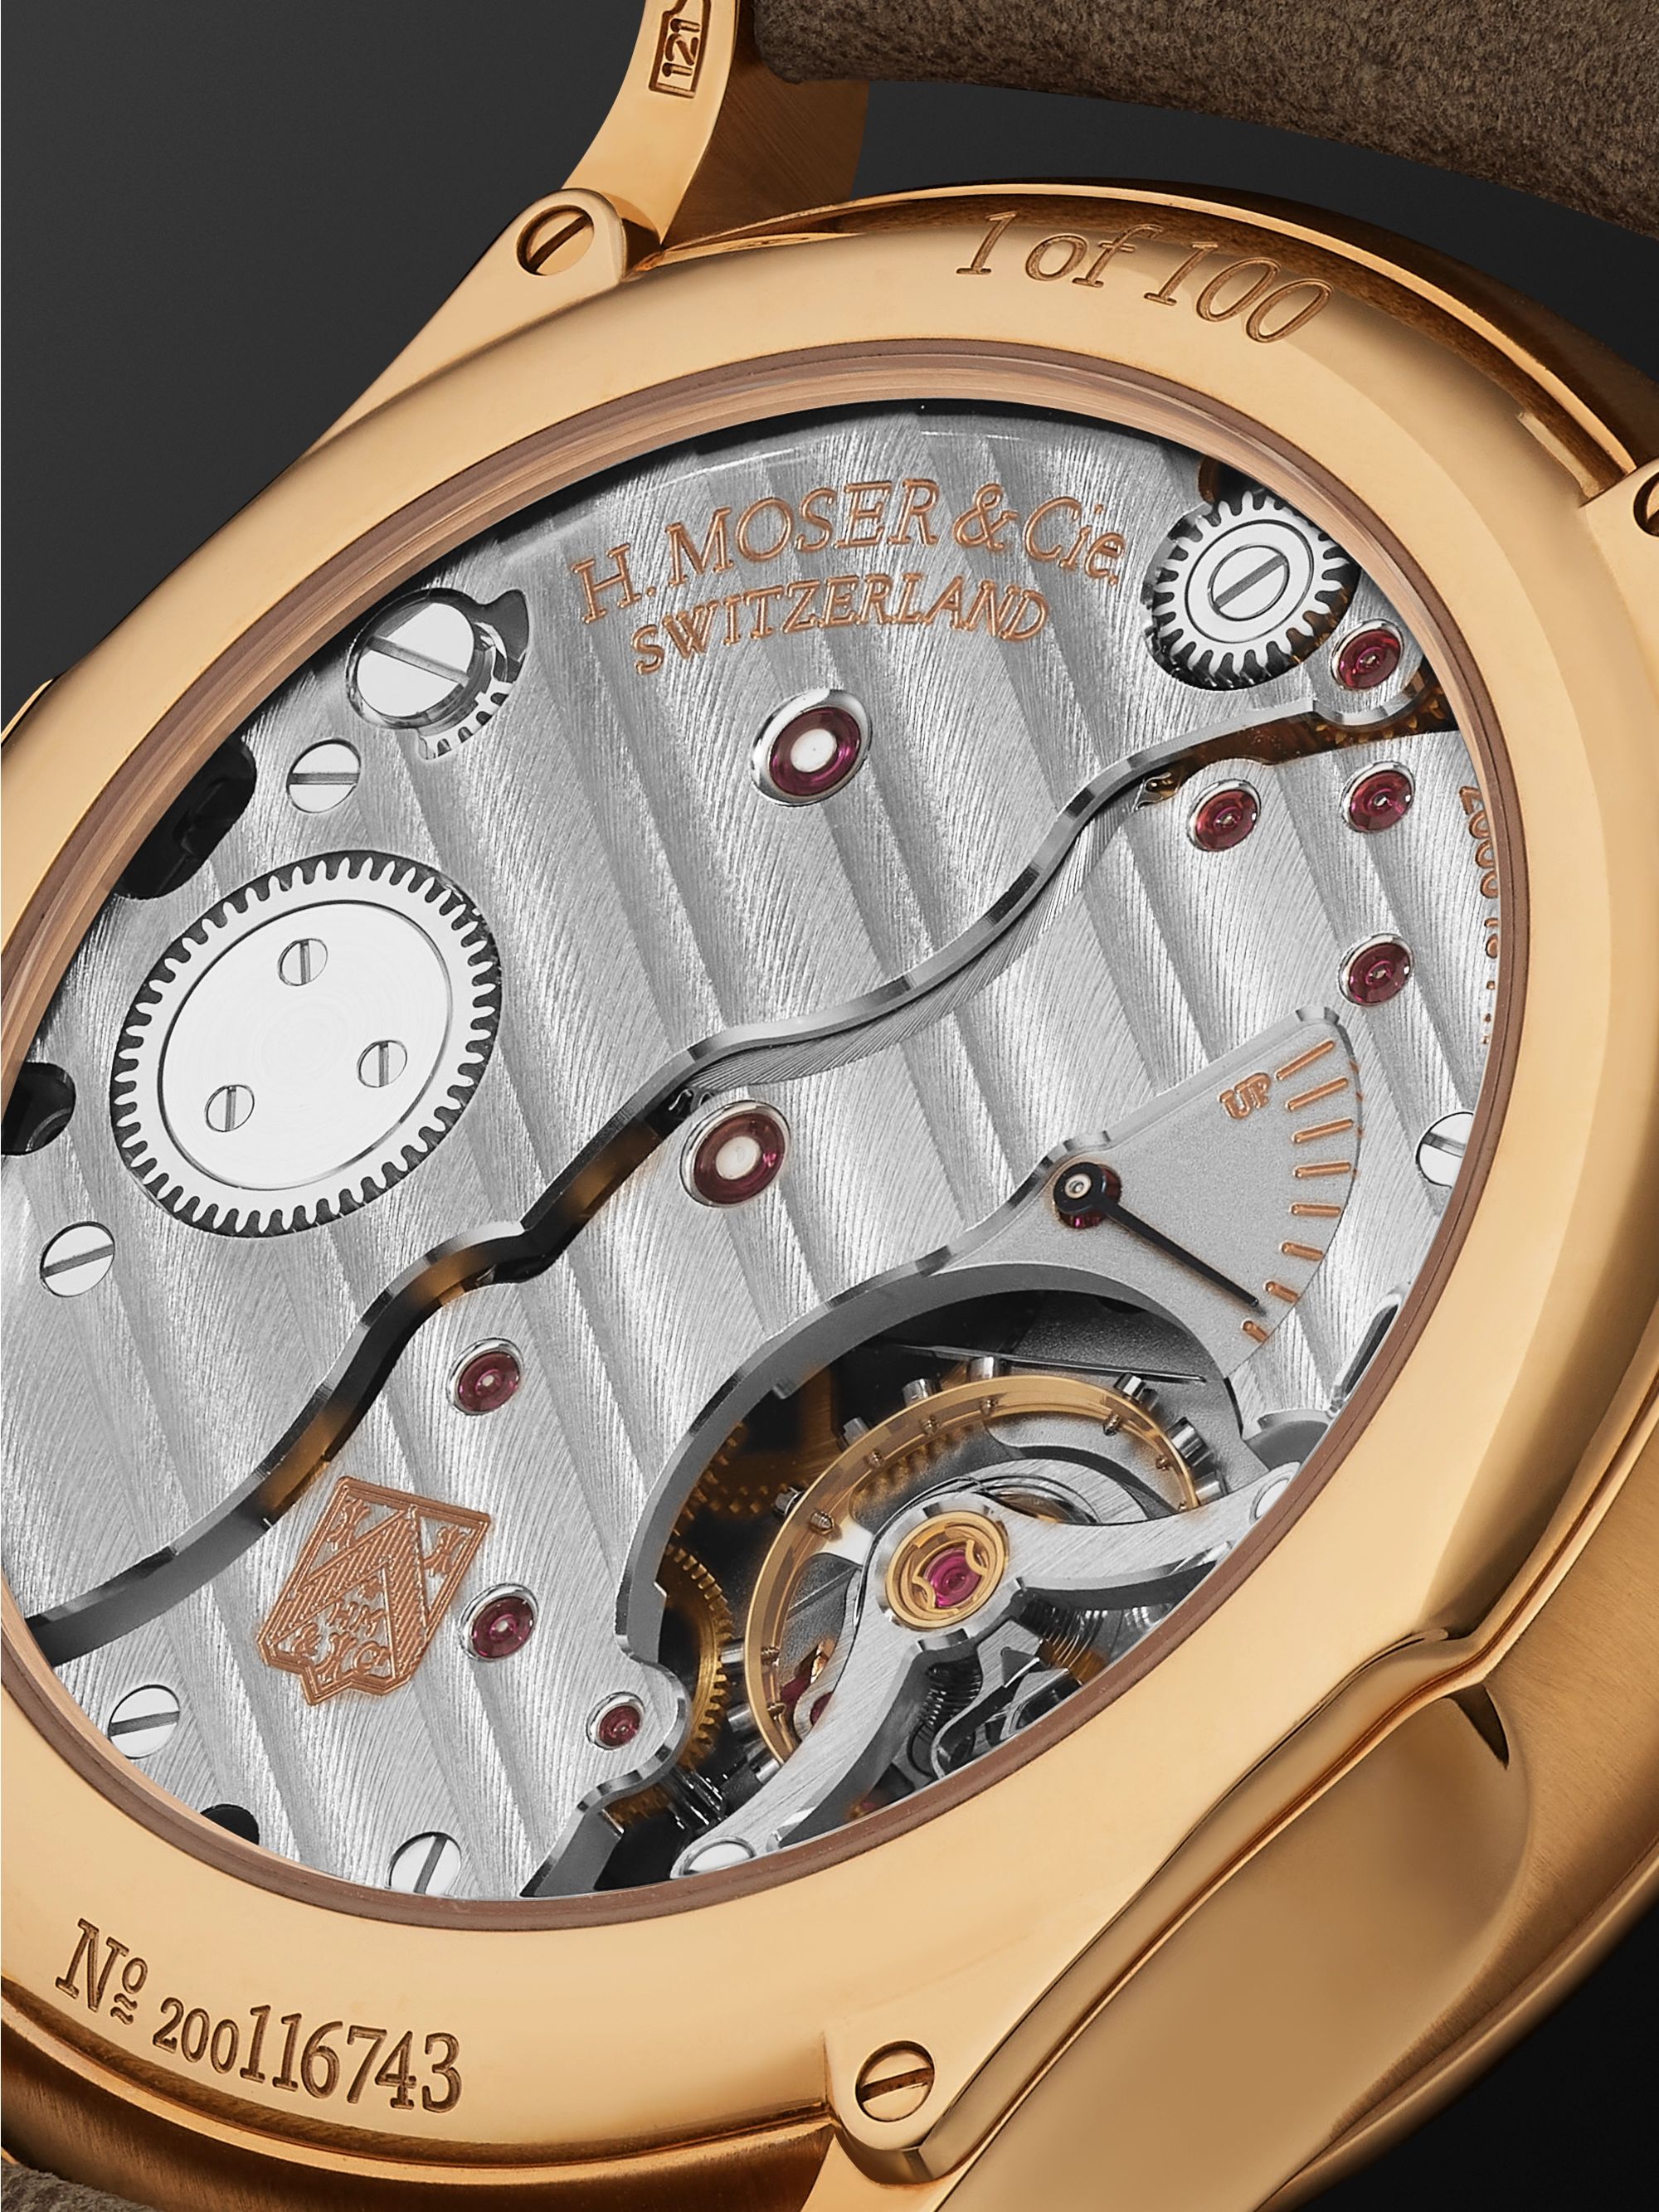 H. MOSER & CIE. Venturer Small Seconds Hand-Wound 43mm 18-Karat Red Gold and Leather Watch, Ref. No. 2327-0408